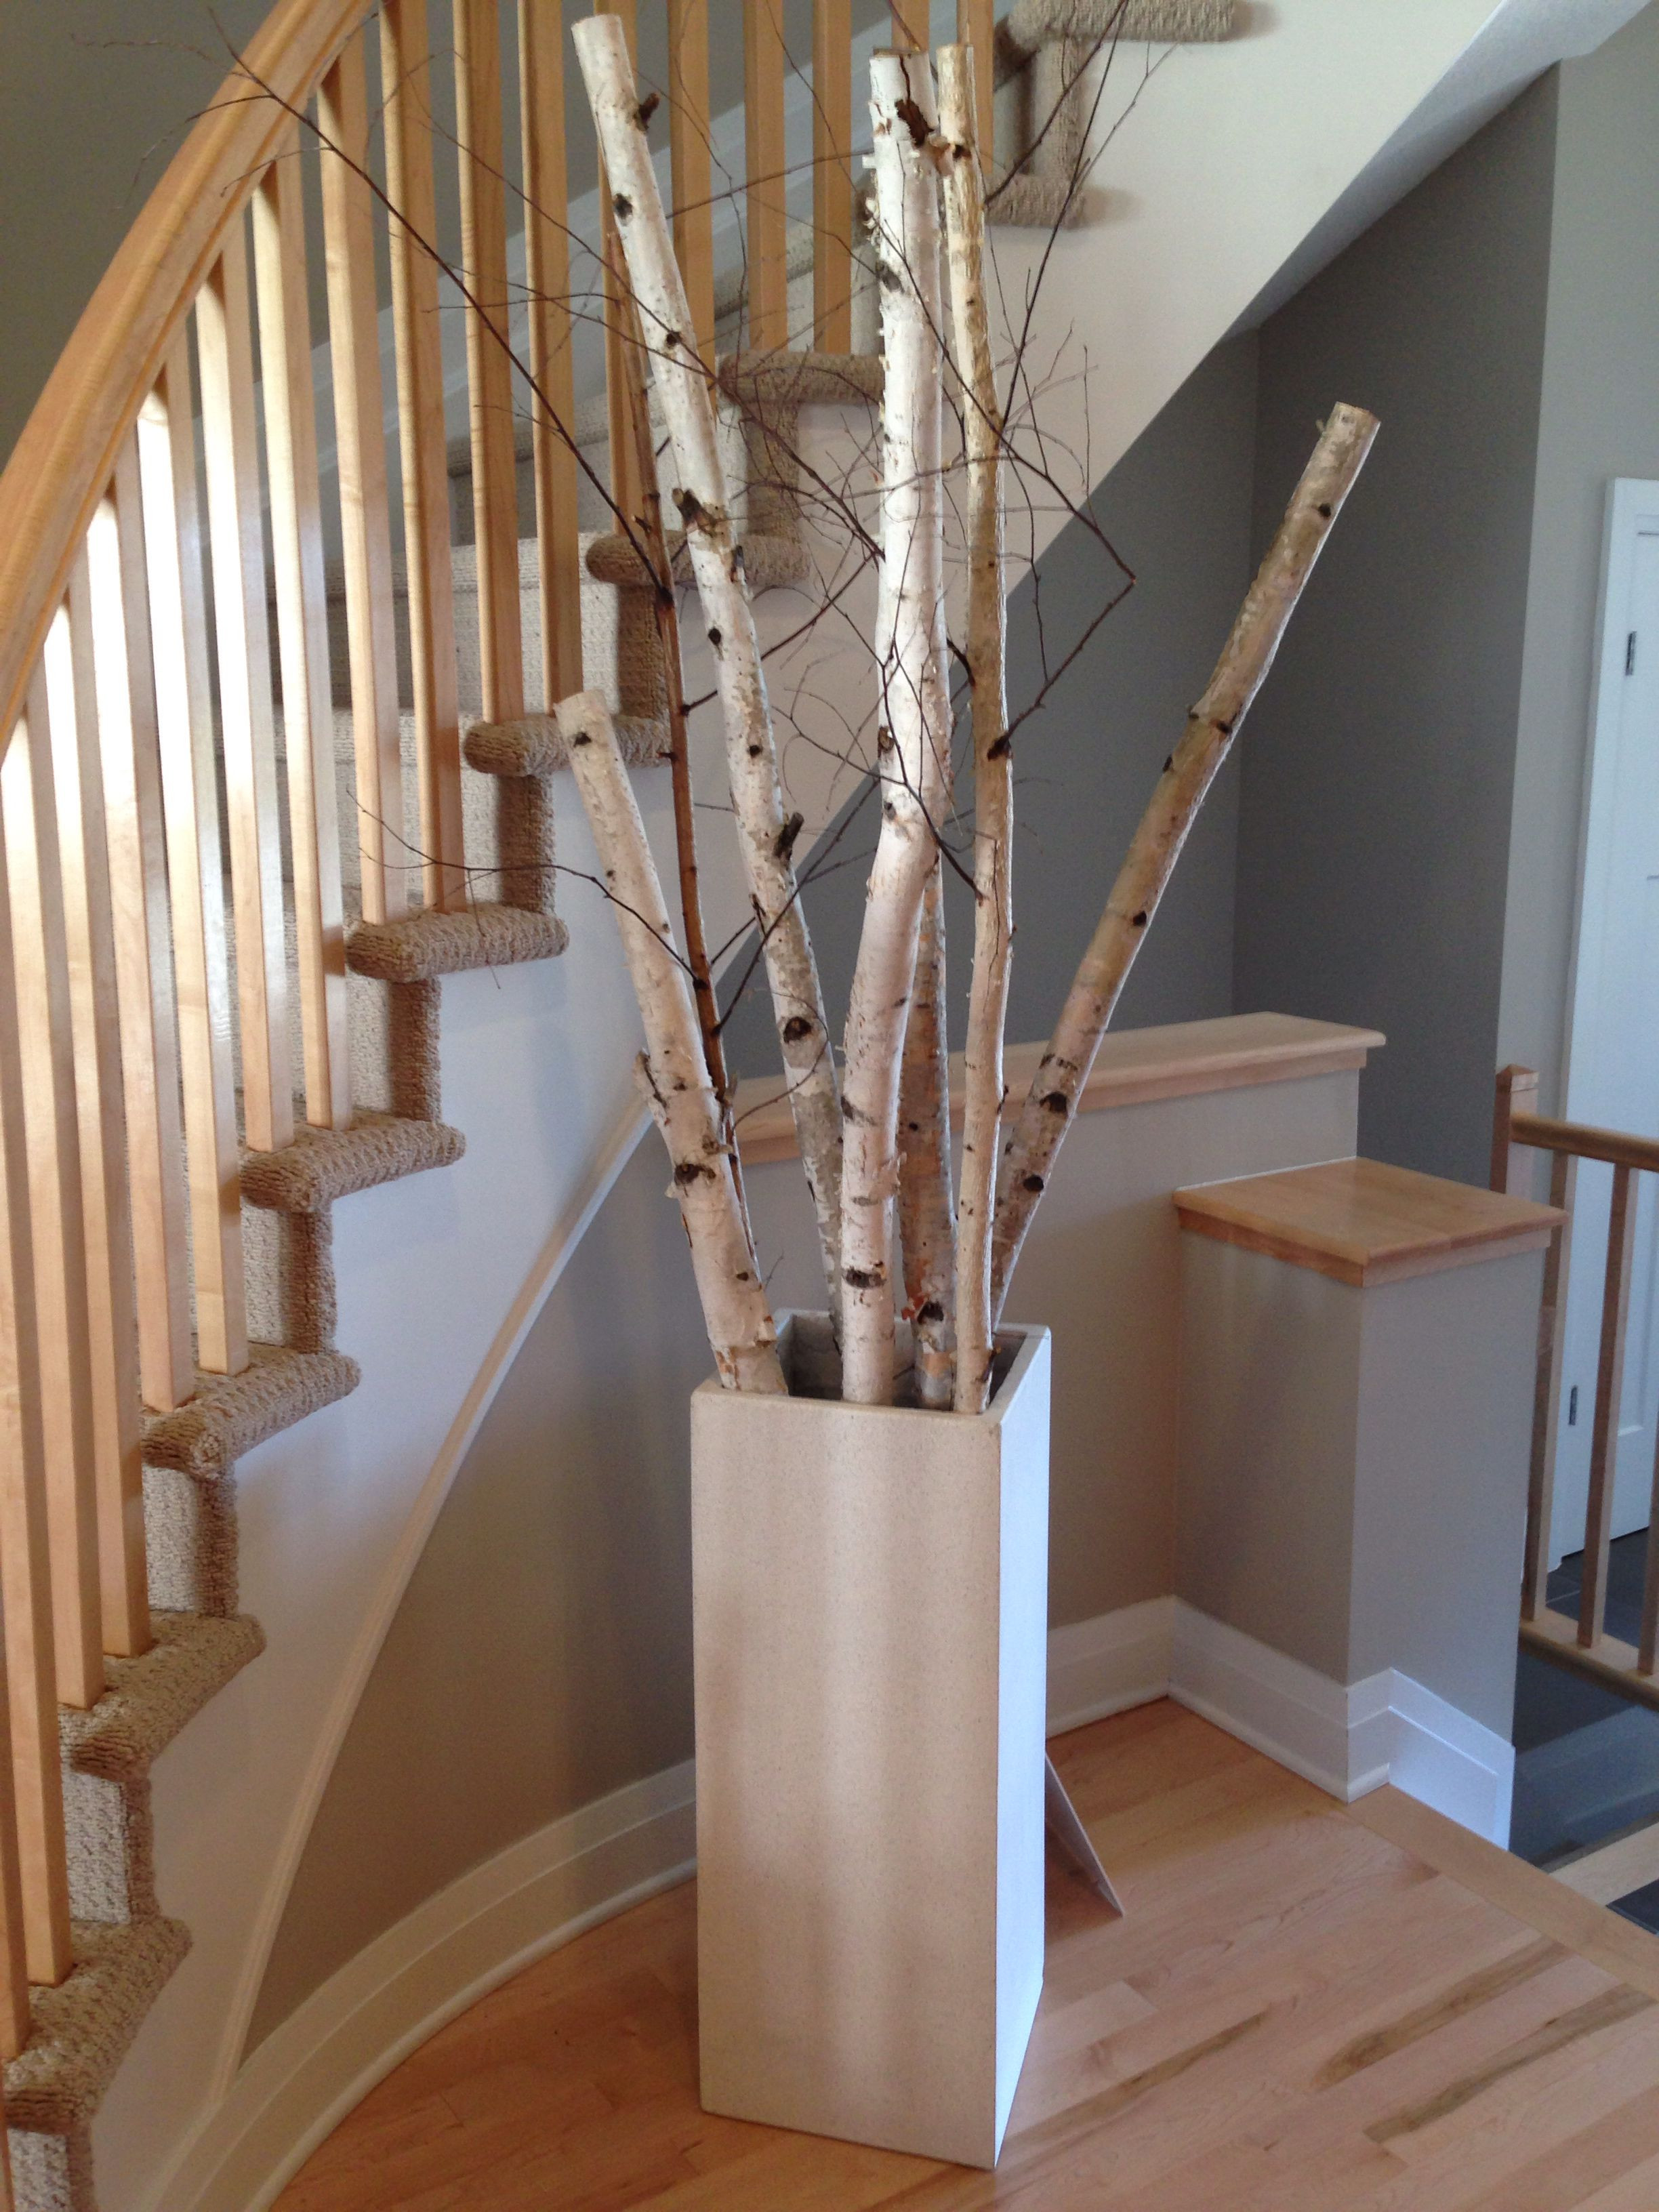 23 attractive 3 Foot Floor Vase 2024 free download 3 foot floor vase of interesting grouping of birch tree branches for the home for interesting grouping of birch tree branches